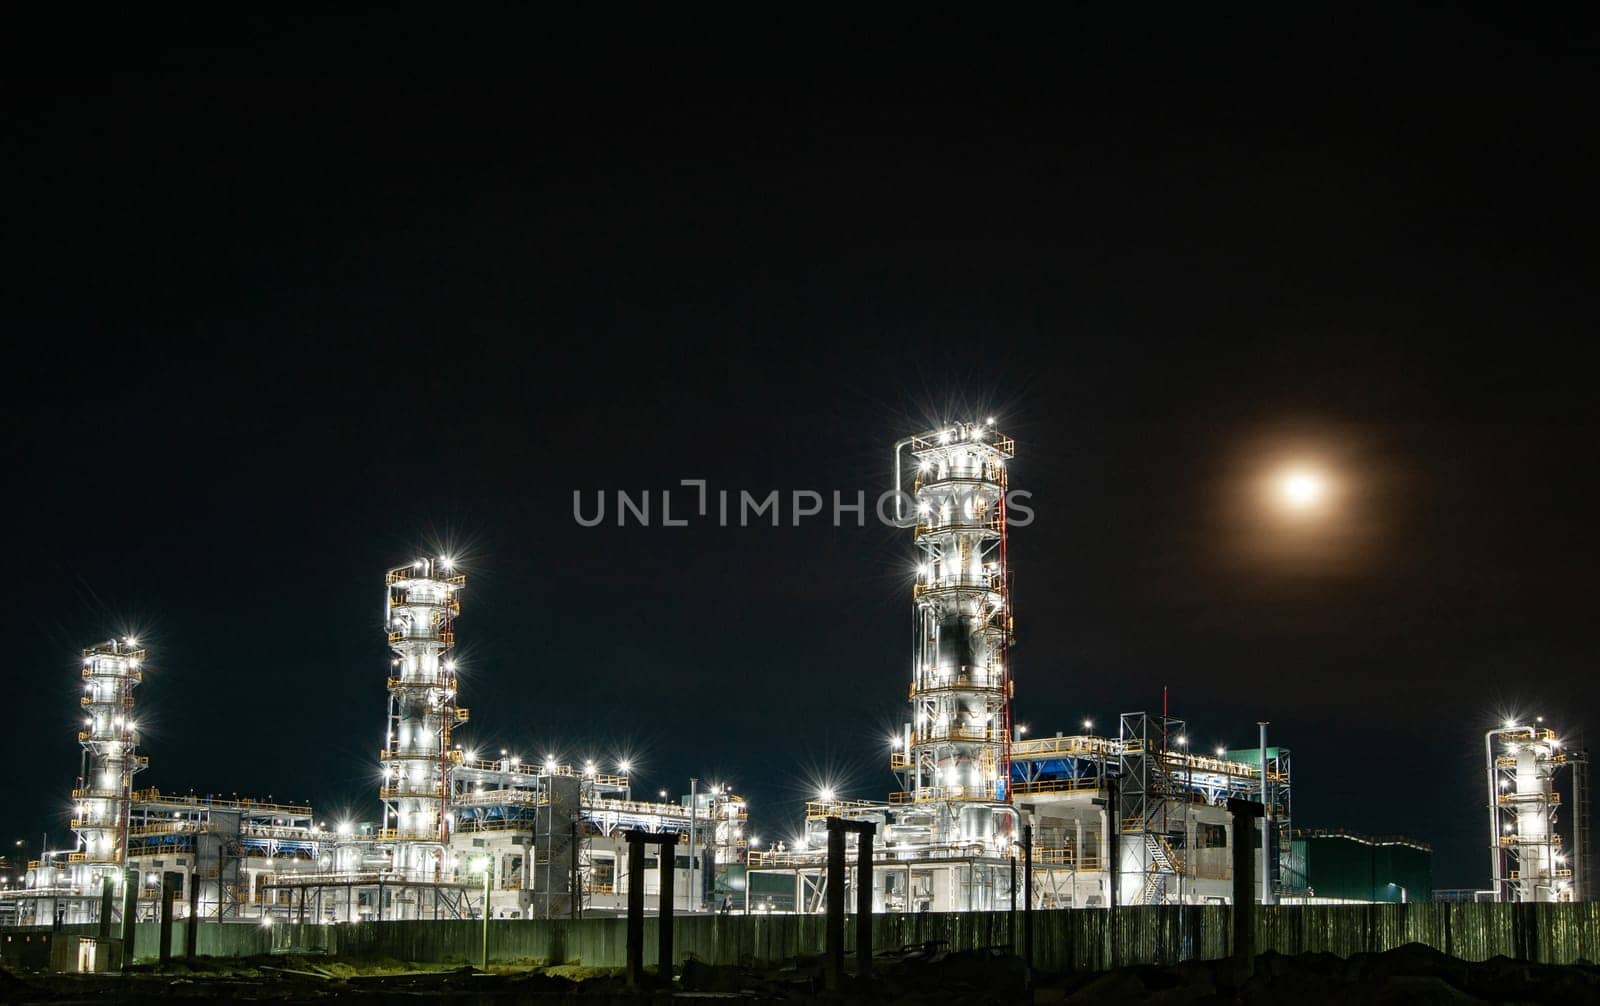 The oil refinery factory at night